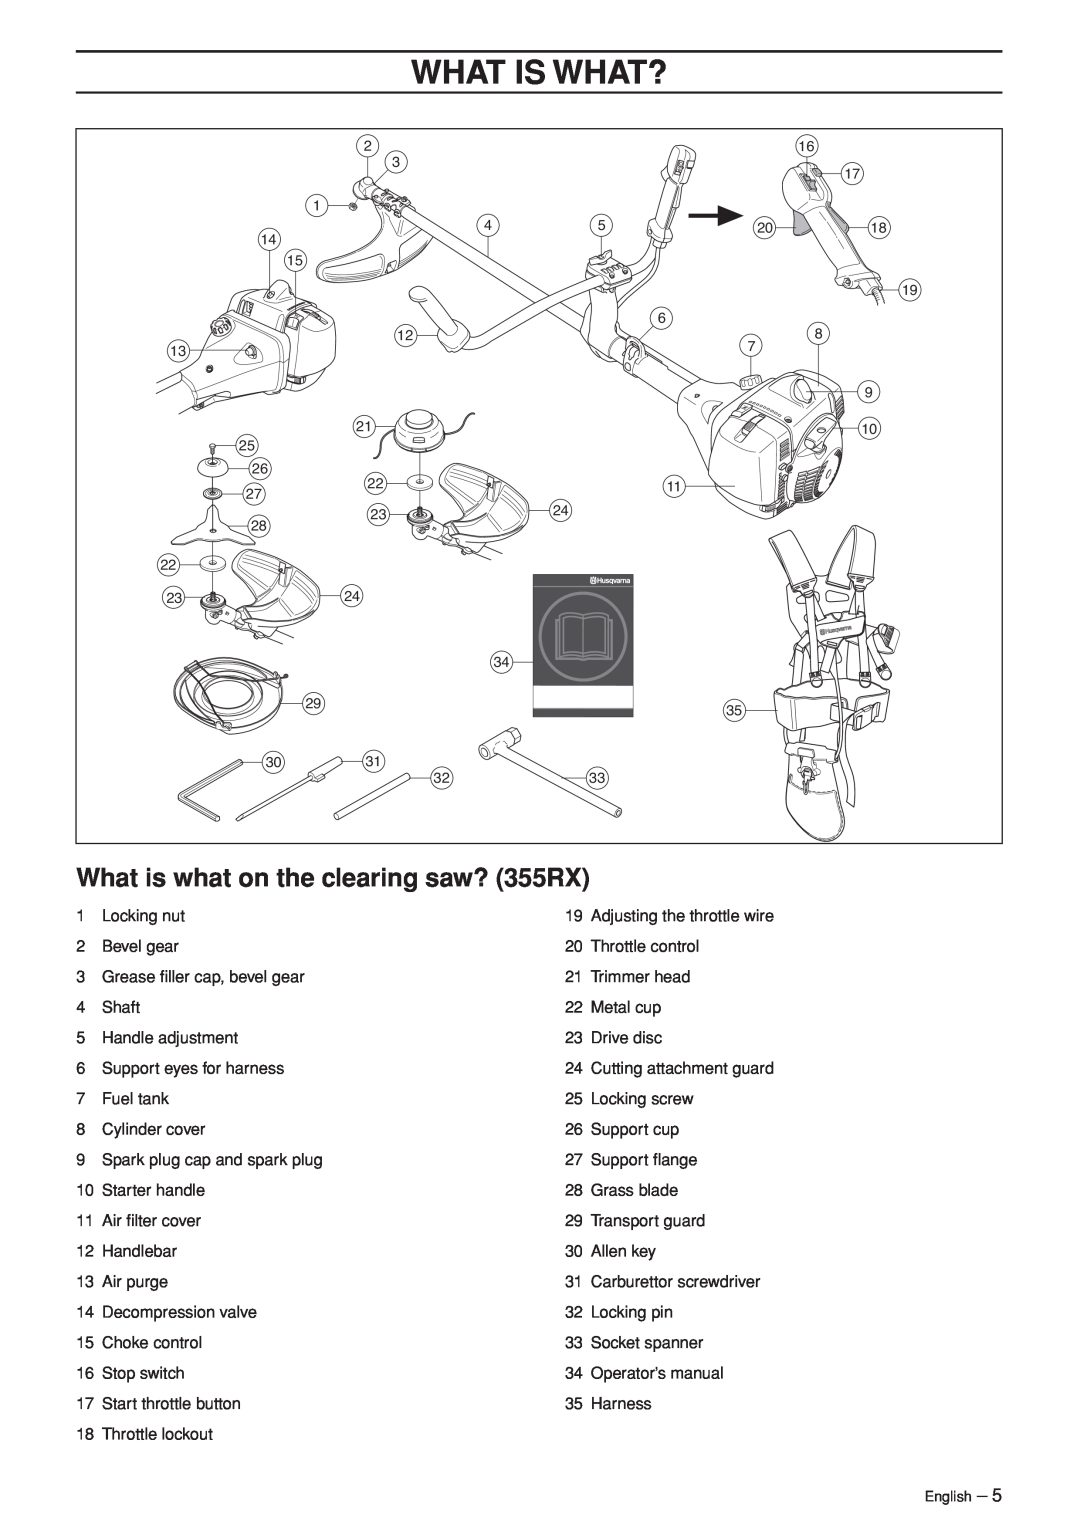 Husqvarna 355FX, 355FXT, 355RX, 355FRM manual What Is What?, What is what on the clearing saw? 355RX 